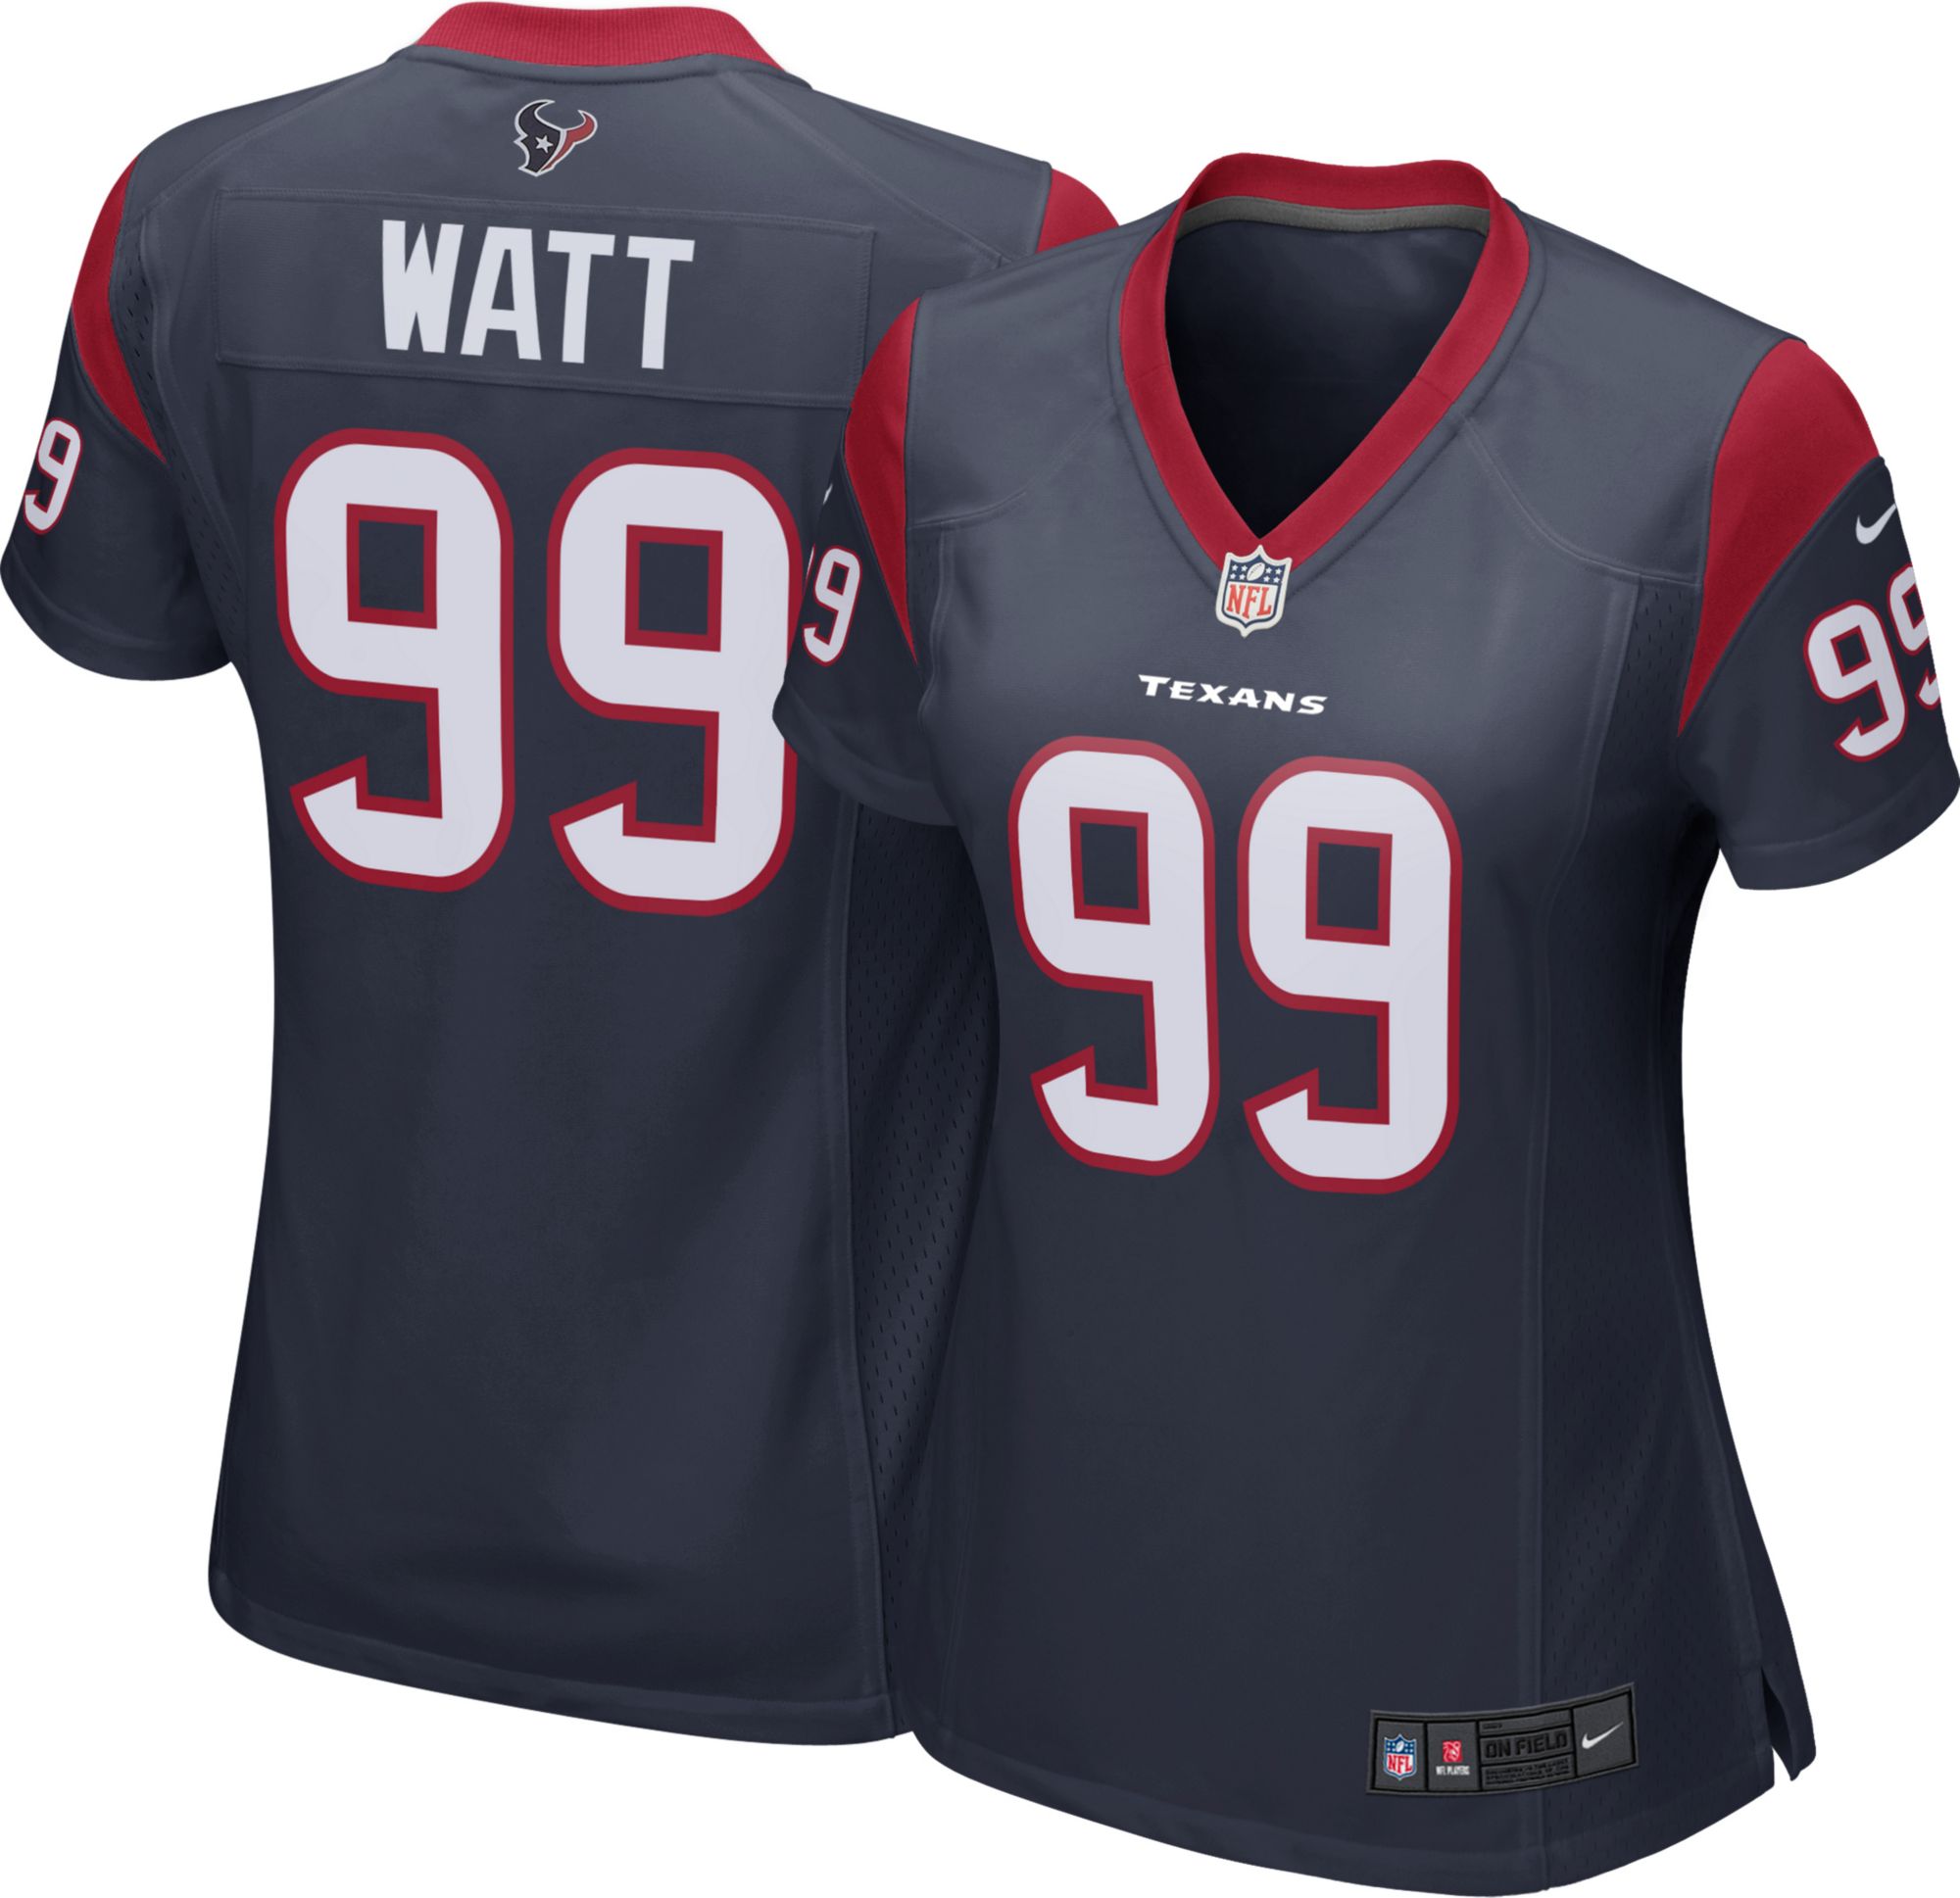 texans game day jersey colors